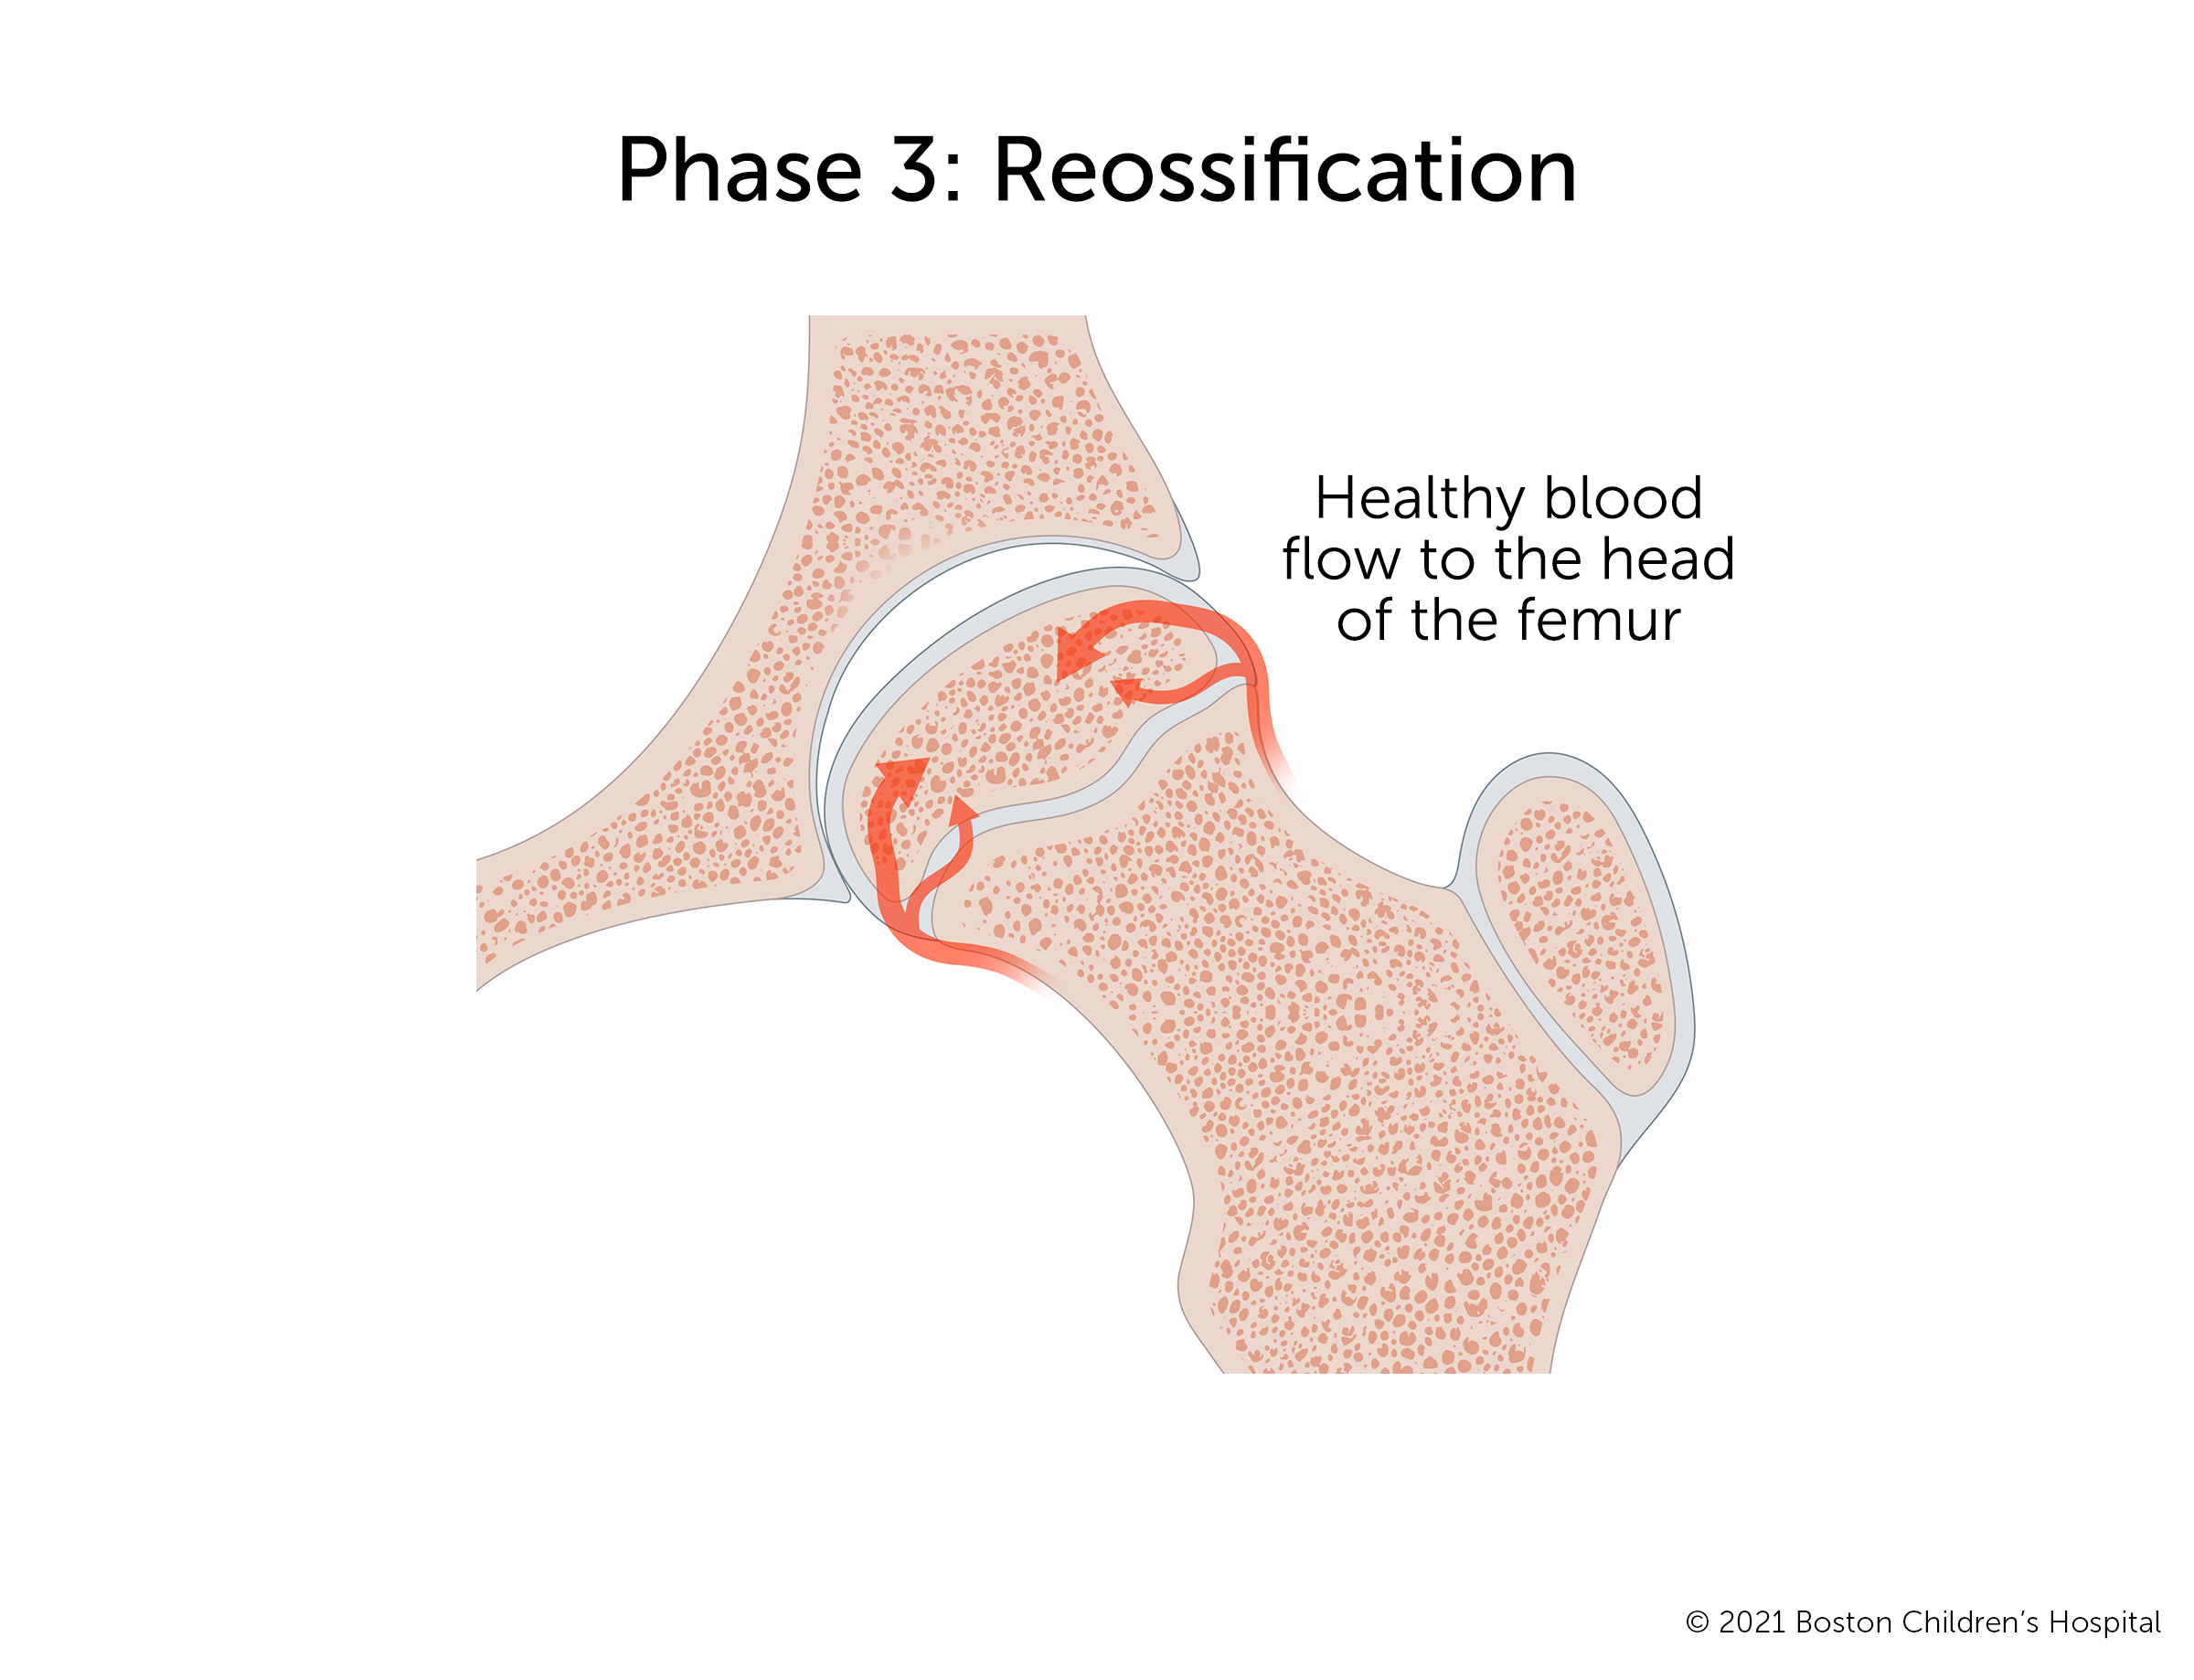 Phase 3: Reossification. Healthy blood flow returns to the head of the femur and new bone grows, making the gap in the socket smaller.